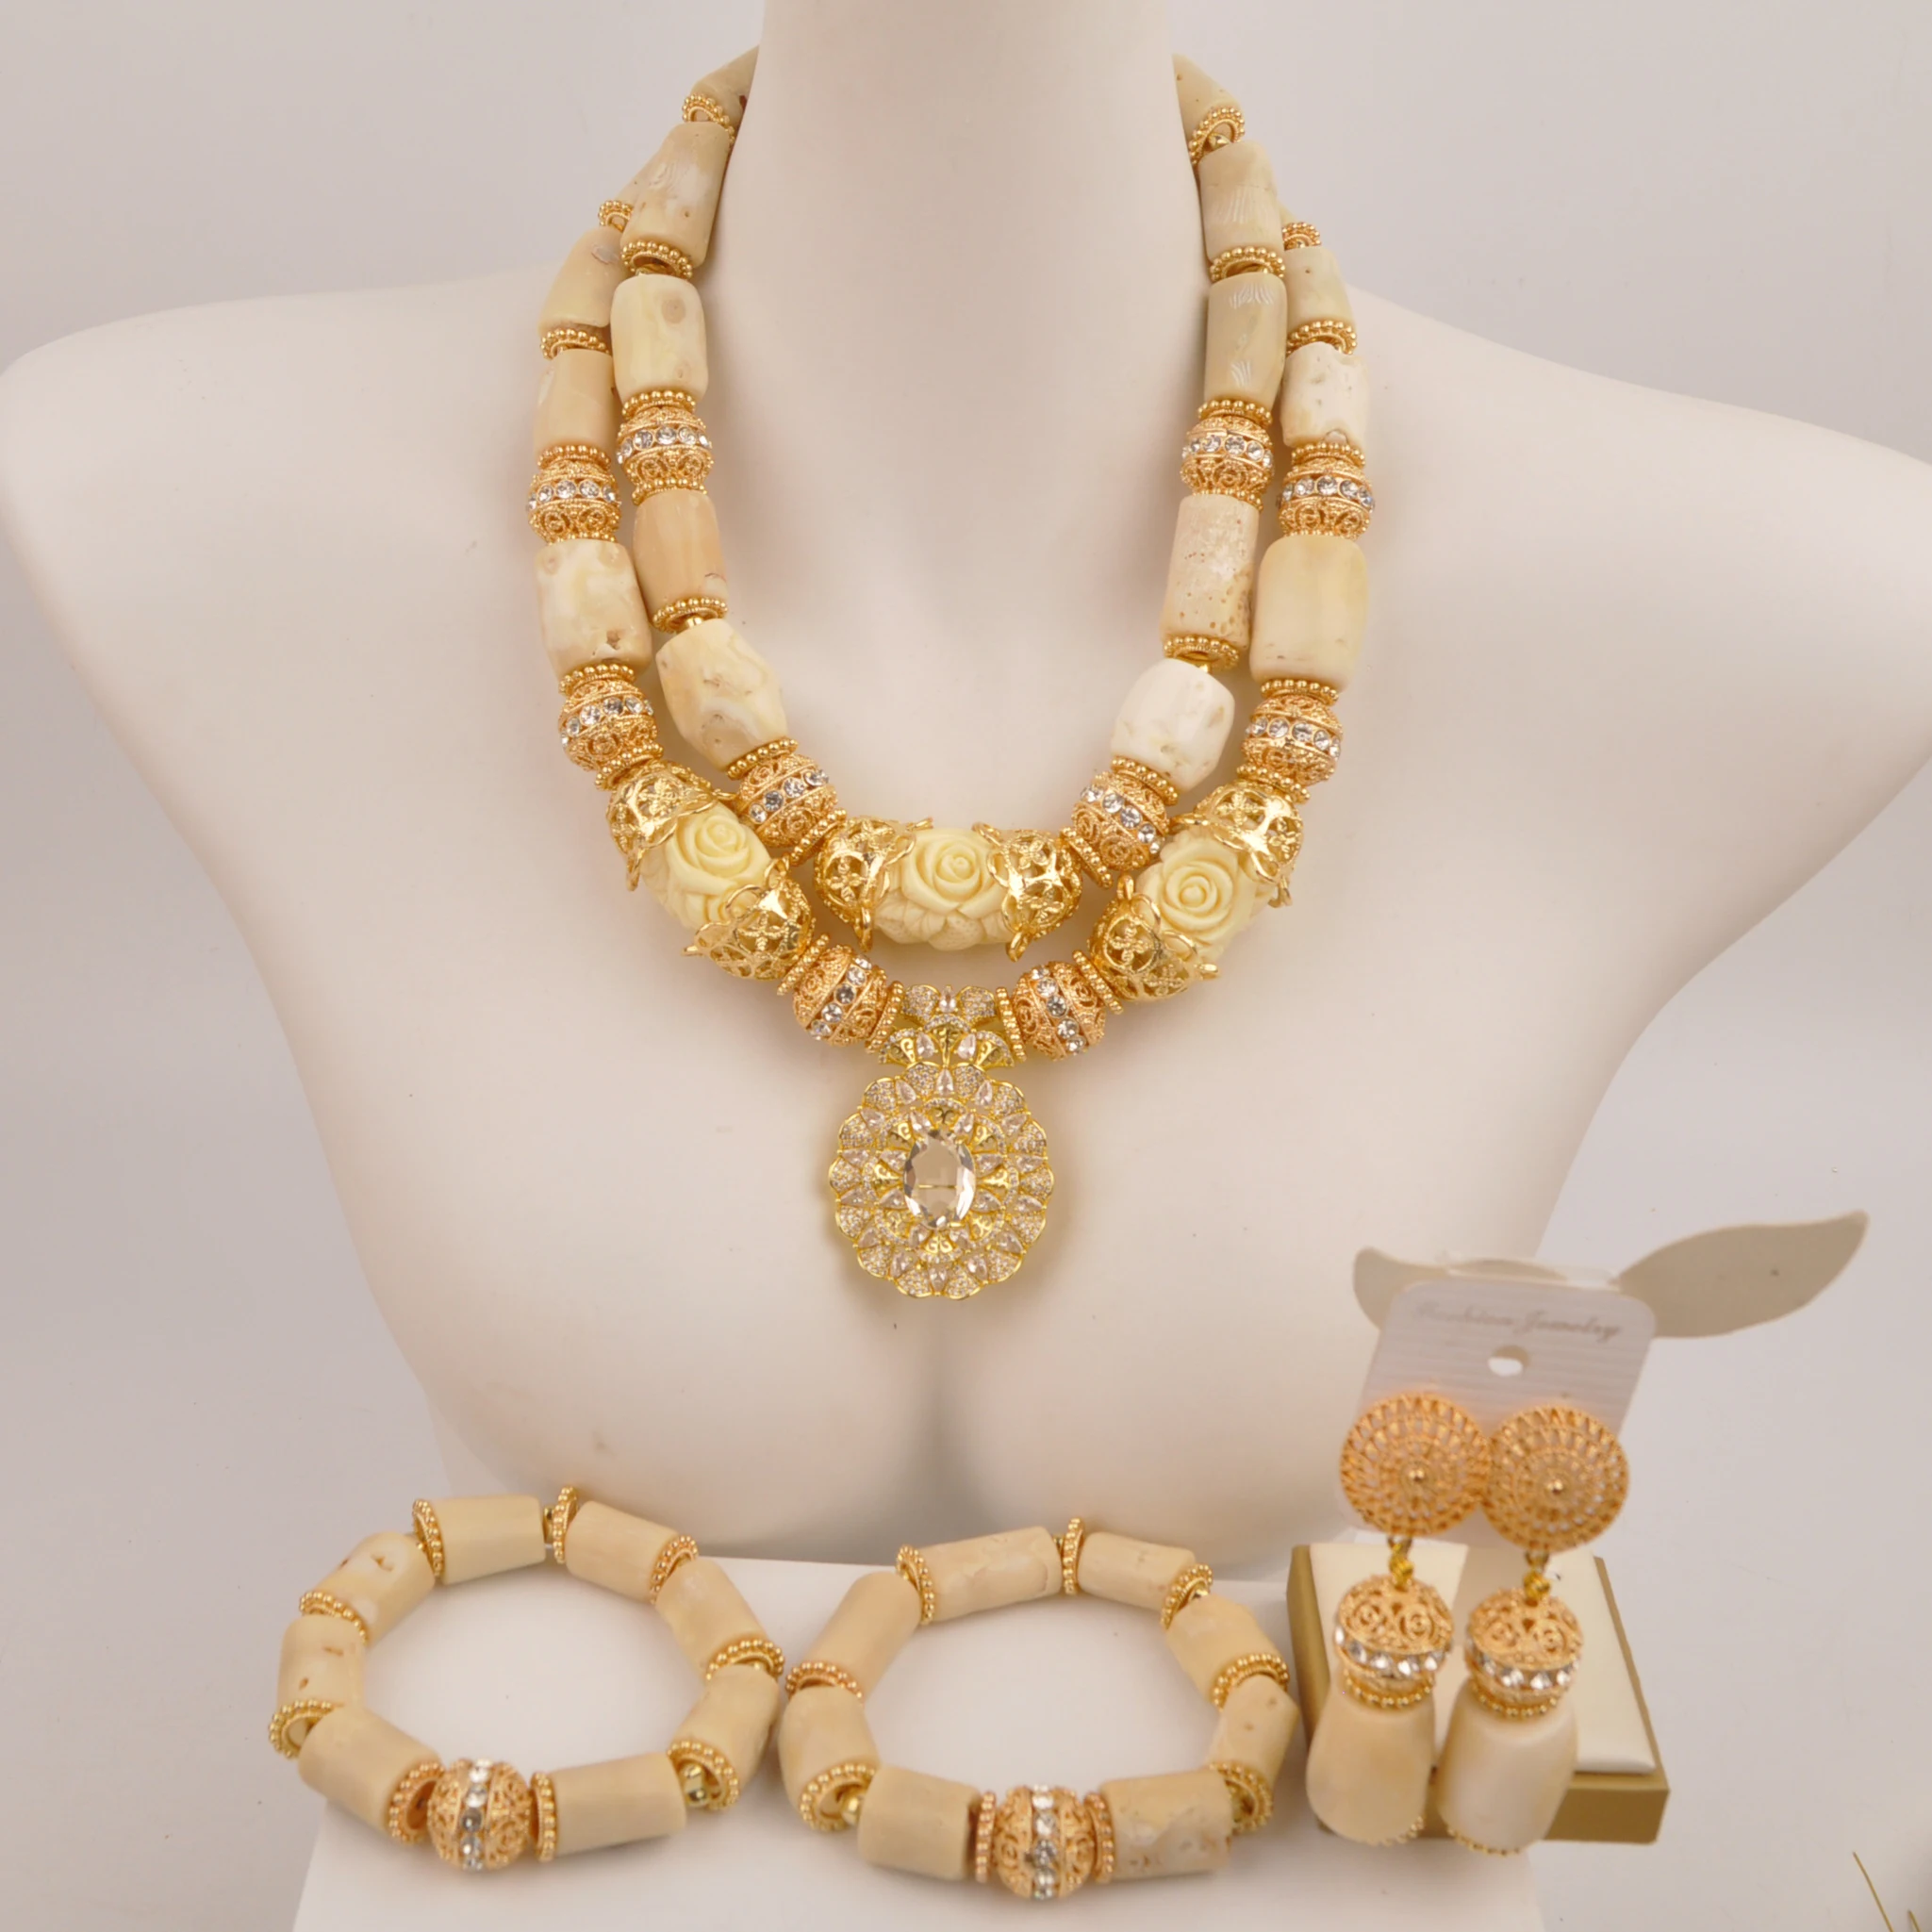 nigerian-bride-wedding-jewelry-white-real-coral-bead-necklace